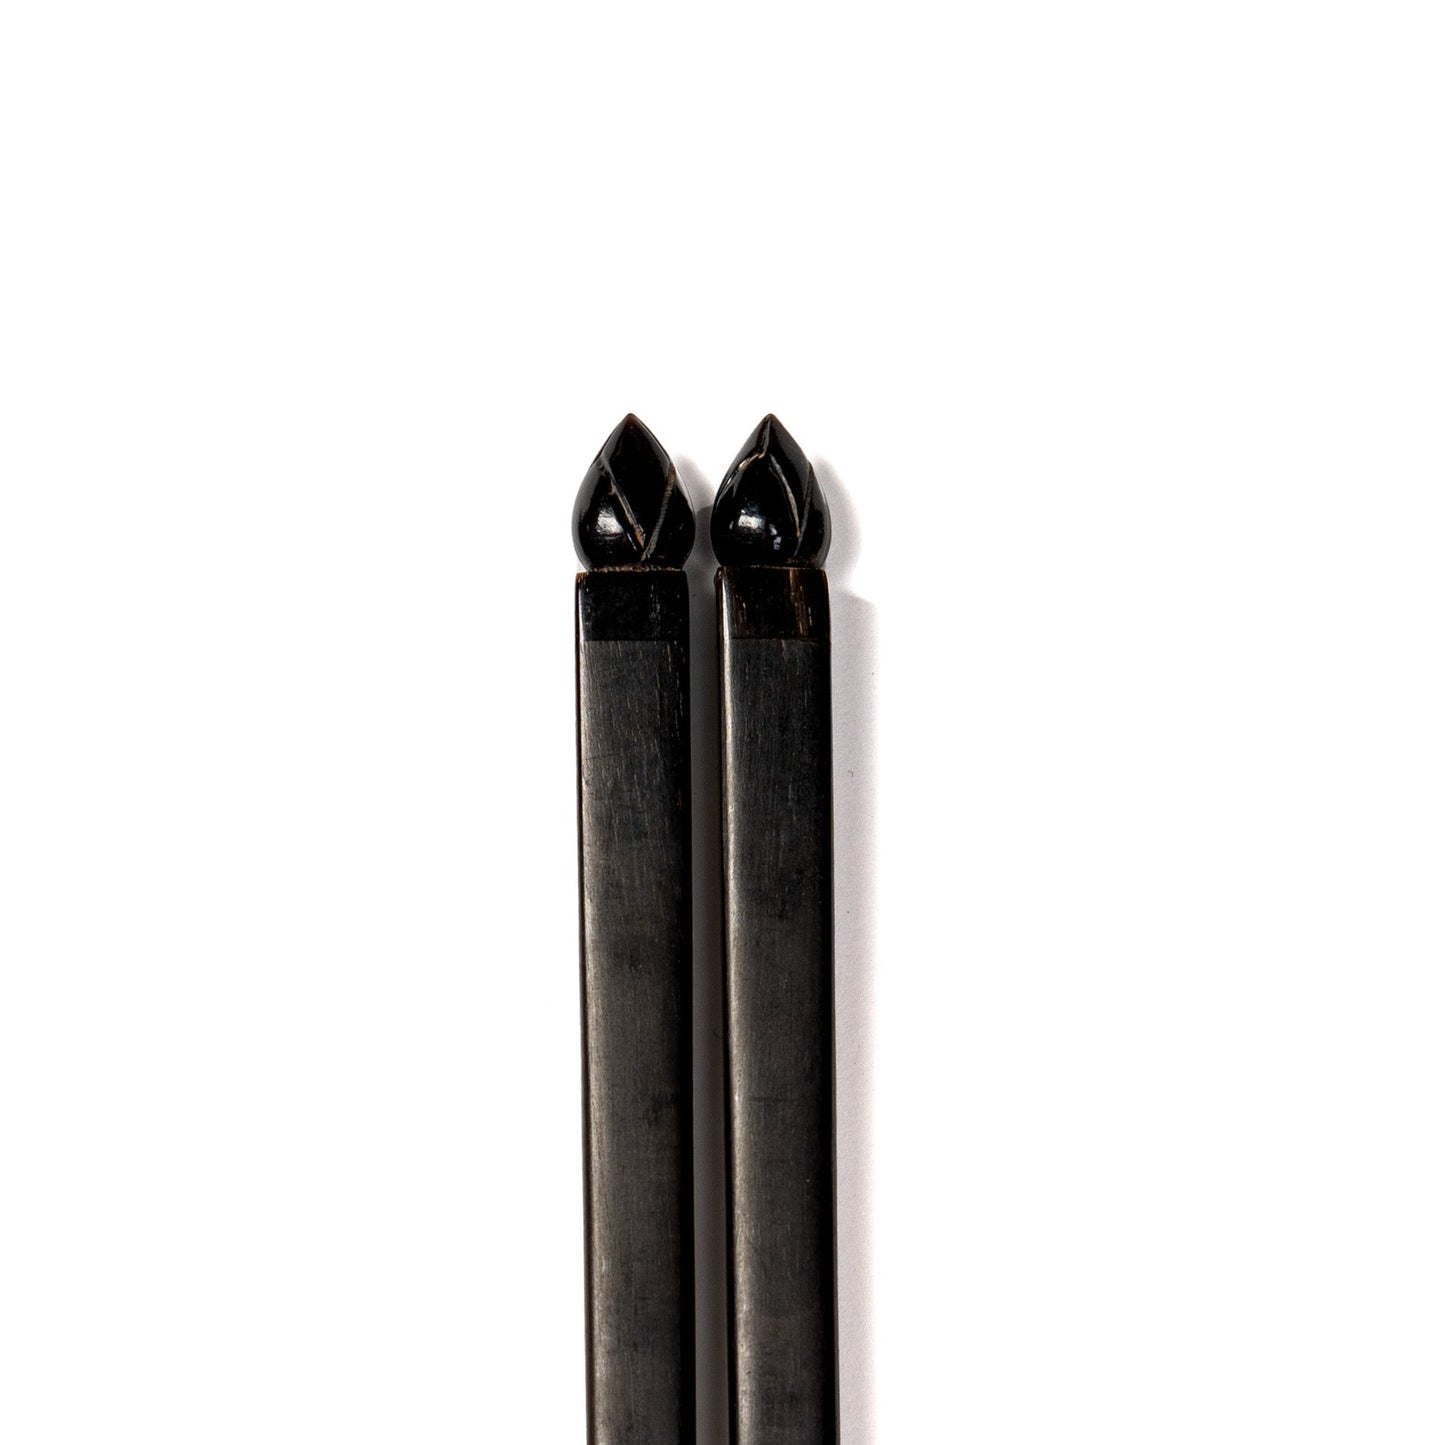 A pair of jet black chopsticks with carved lotus flower detail